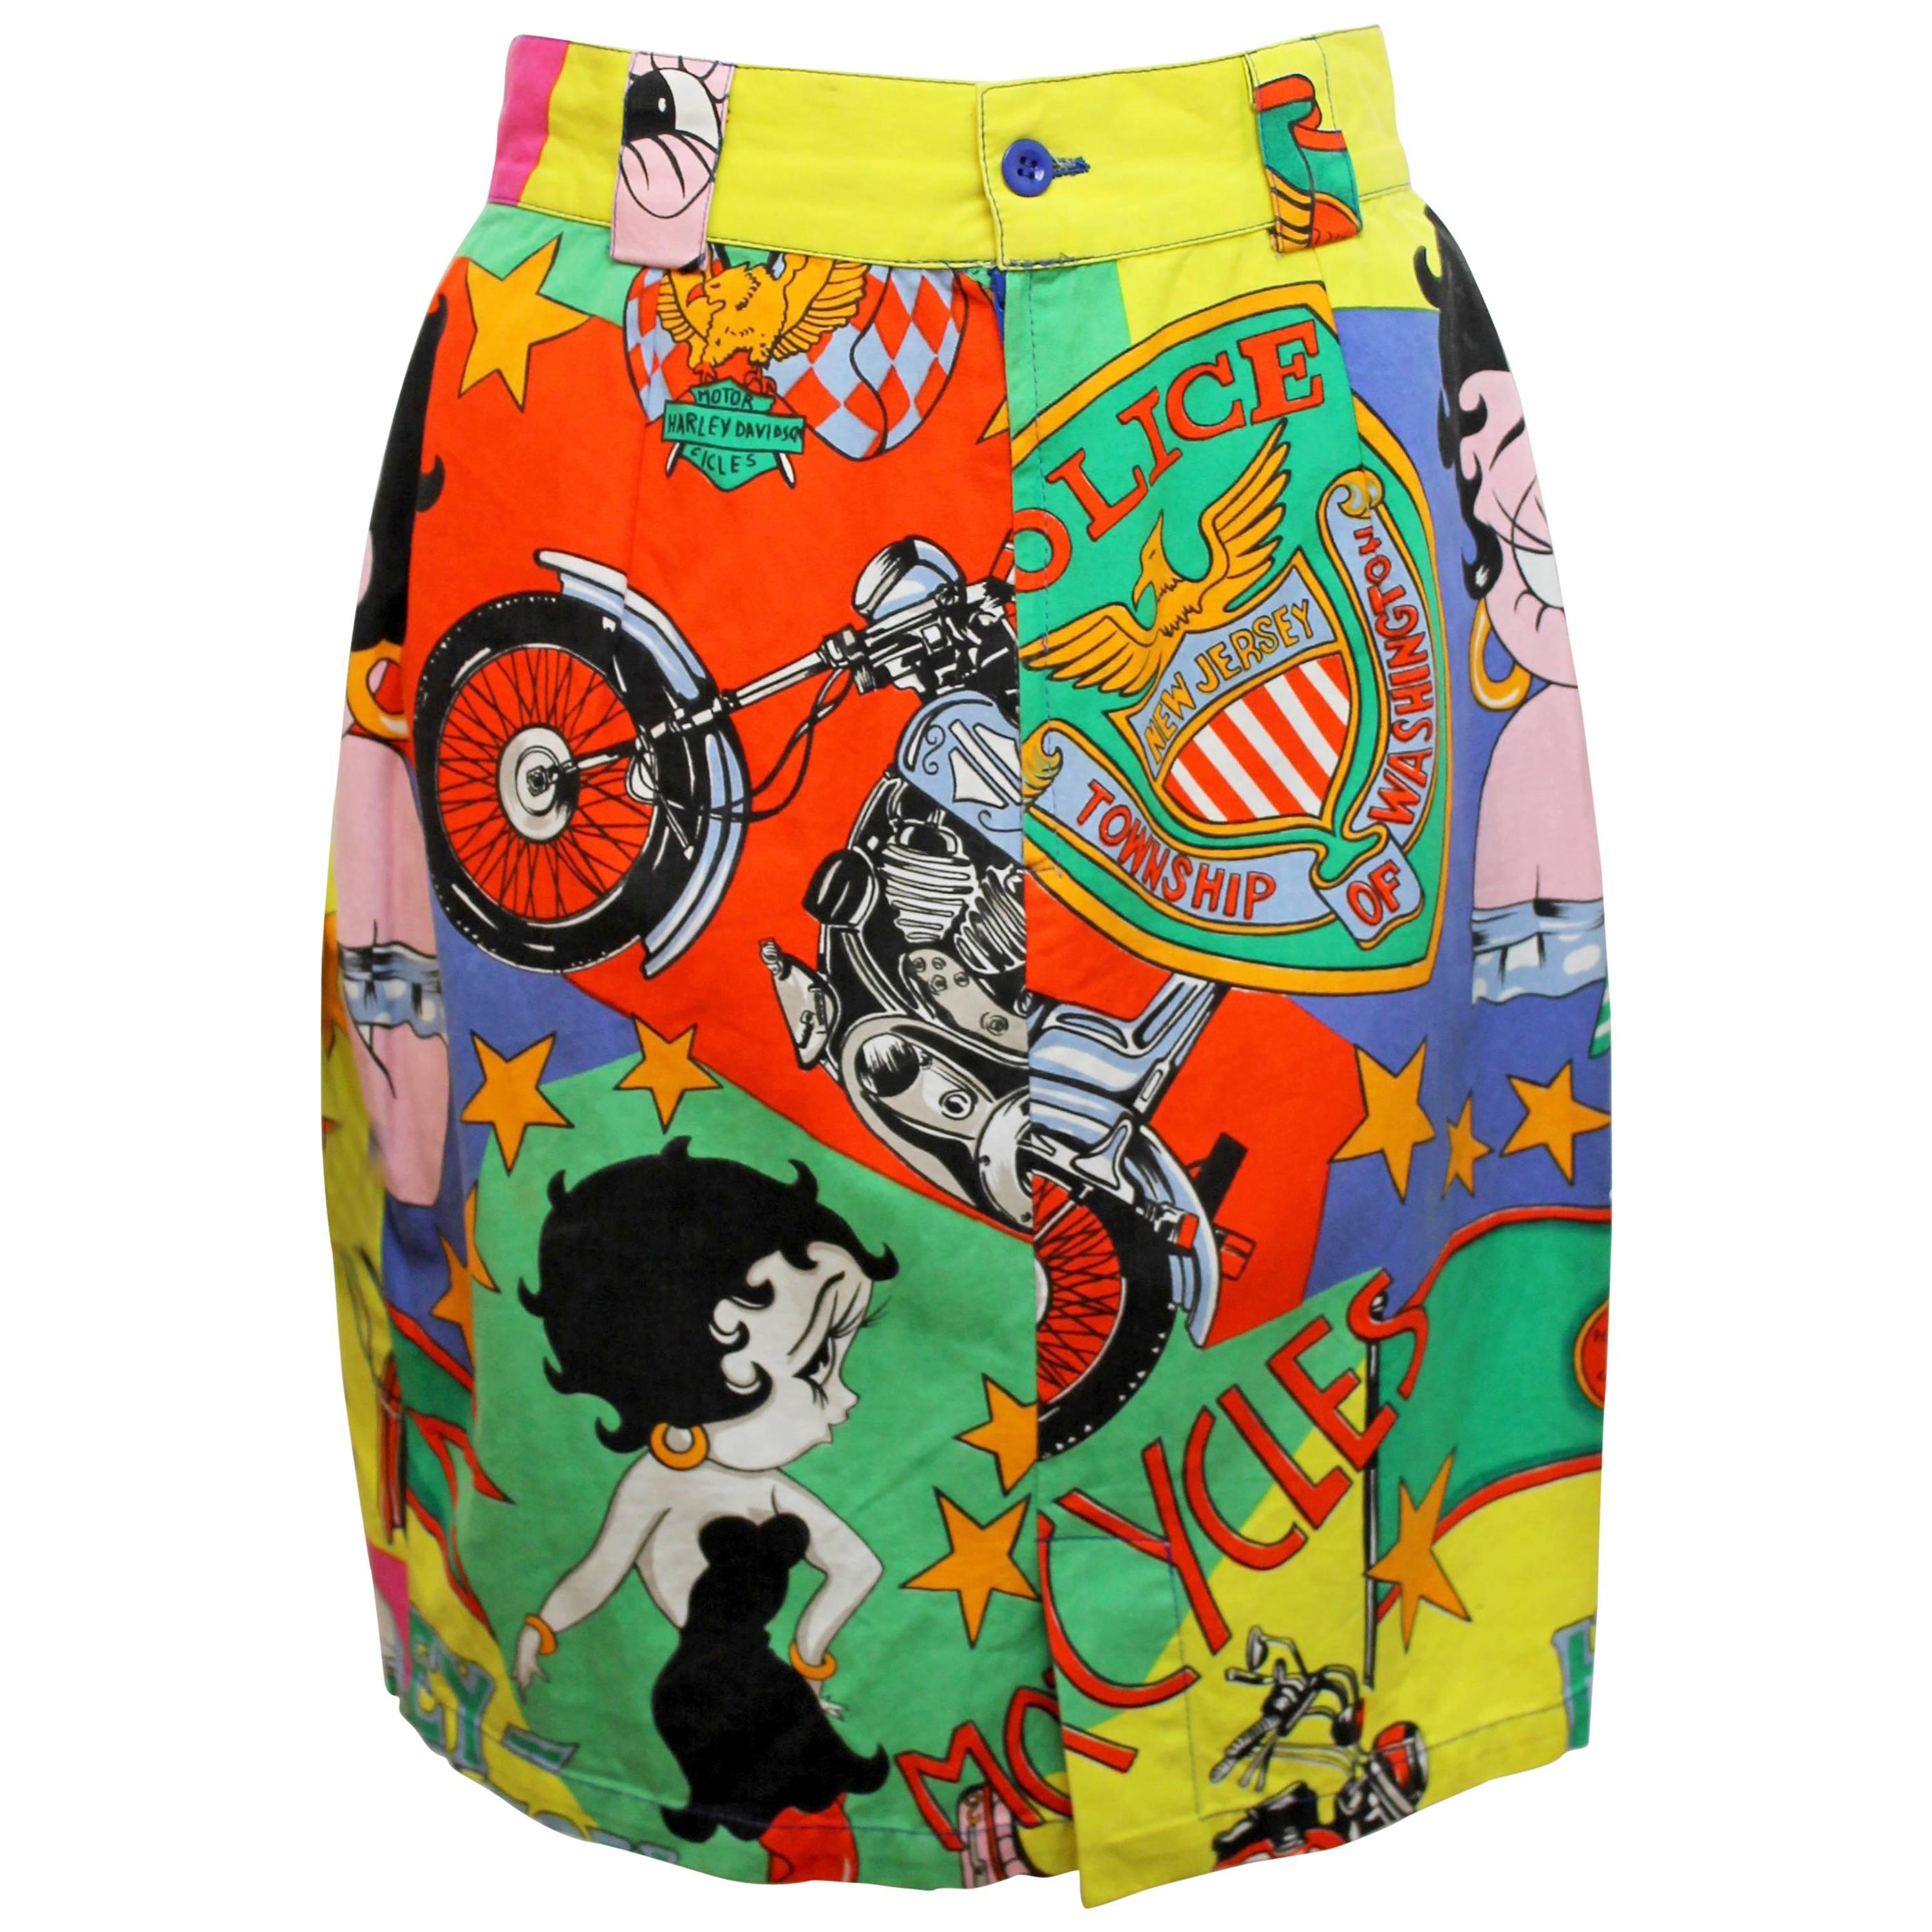 Versace Jeans Couture AW 1991 "Betty Boop" Skirt